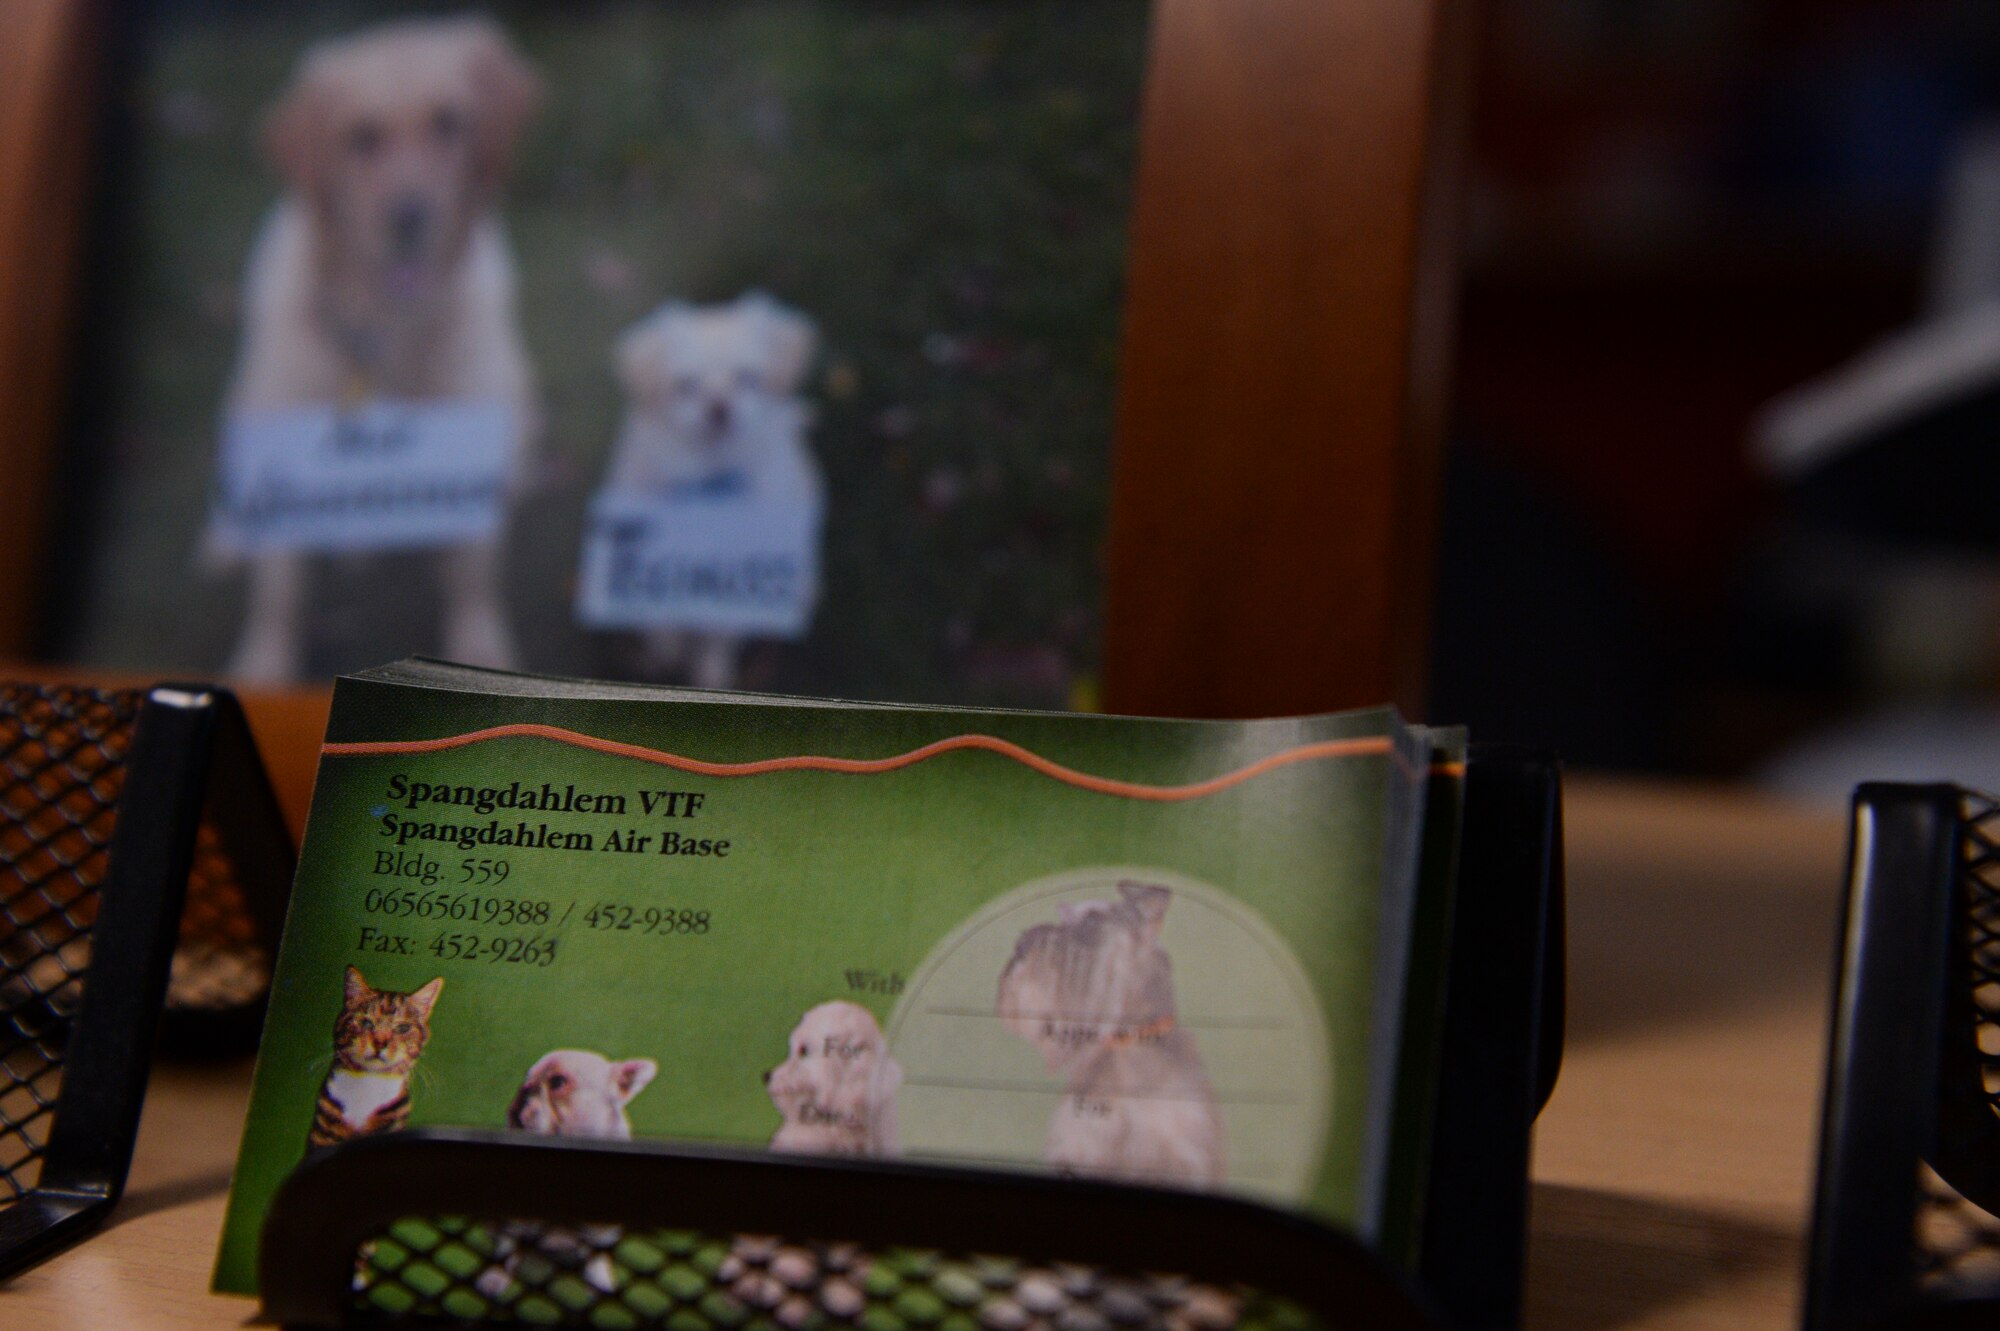 Business cards are displayed at the front desk of the veterinarian clinic Feb. 25, 2014, at Spangdahlem Air Base, Germany. The clinic only cares for dogs and cats, and treats more than 20 furry patients a day. (U.S. Air Force photo by Senior Airman Rusty Frank/Released)